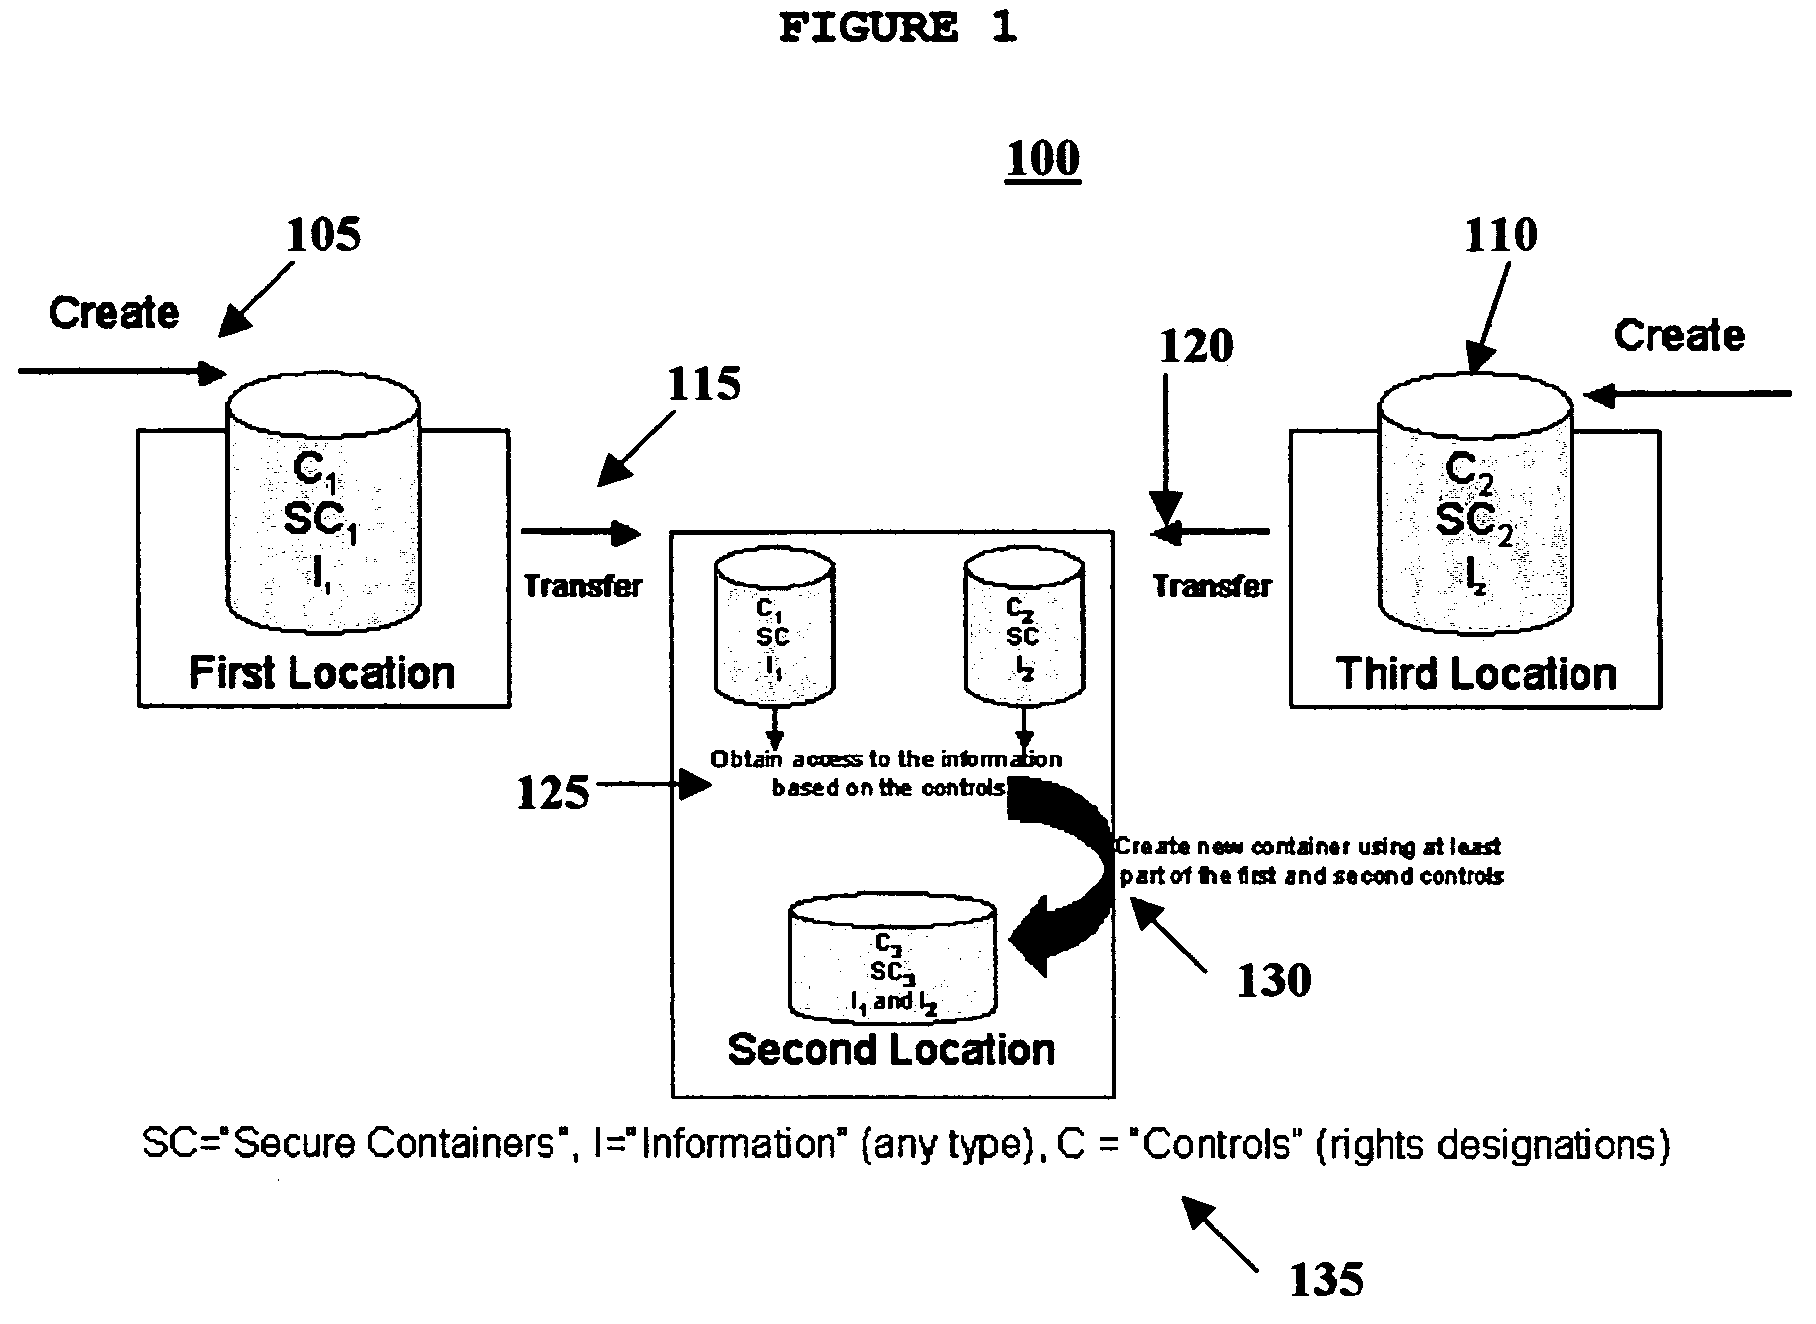 Systems and methods for evaluating information to identify, and act upon, intellectual property issues